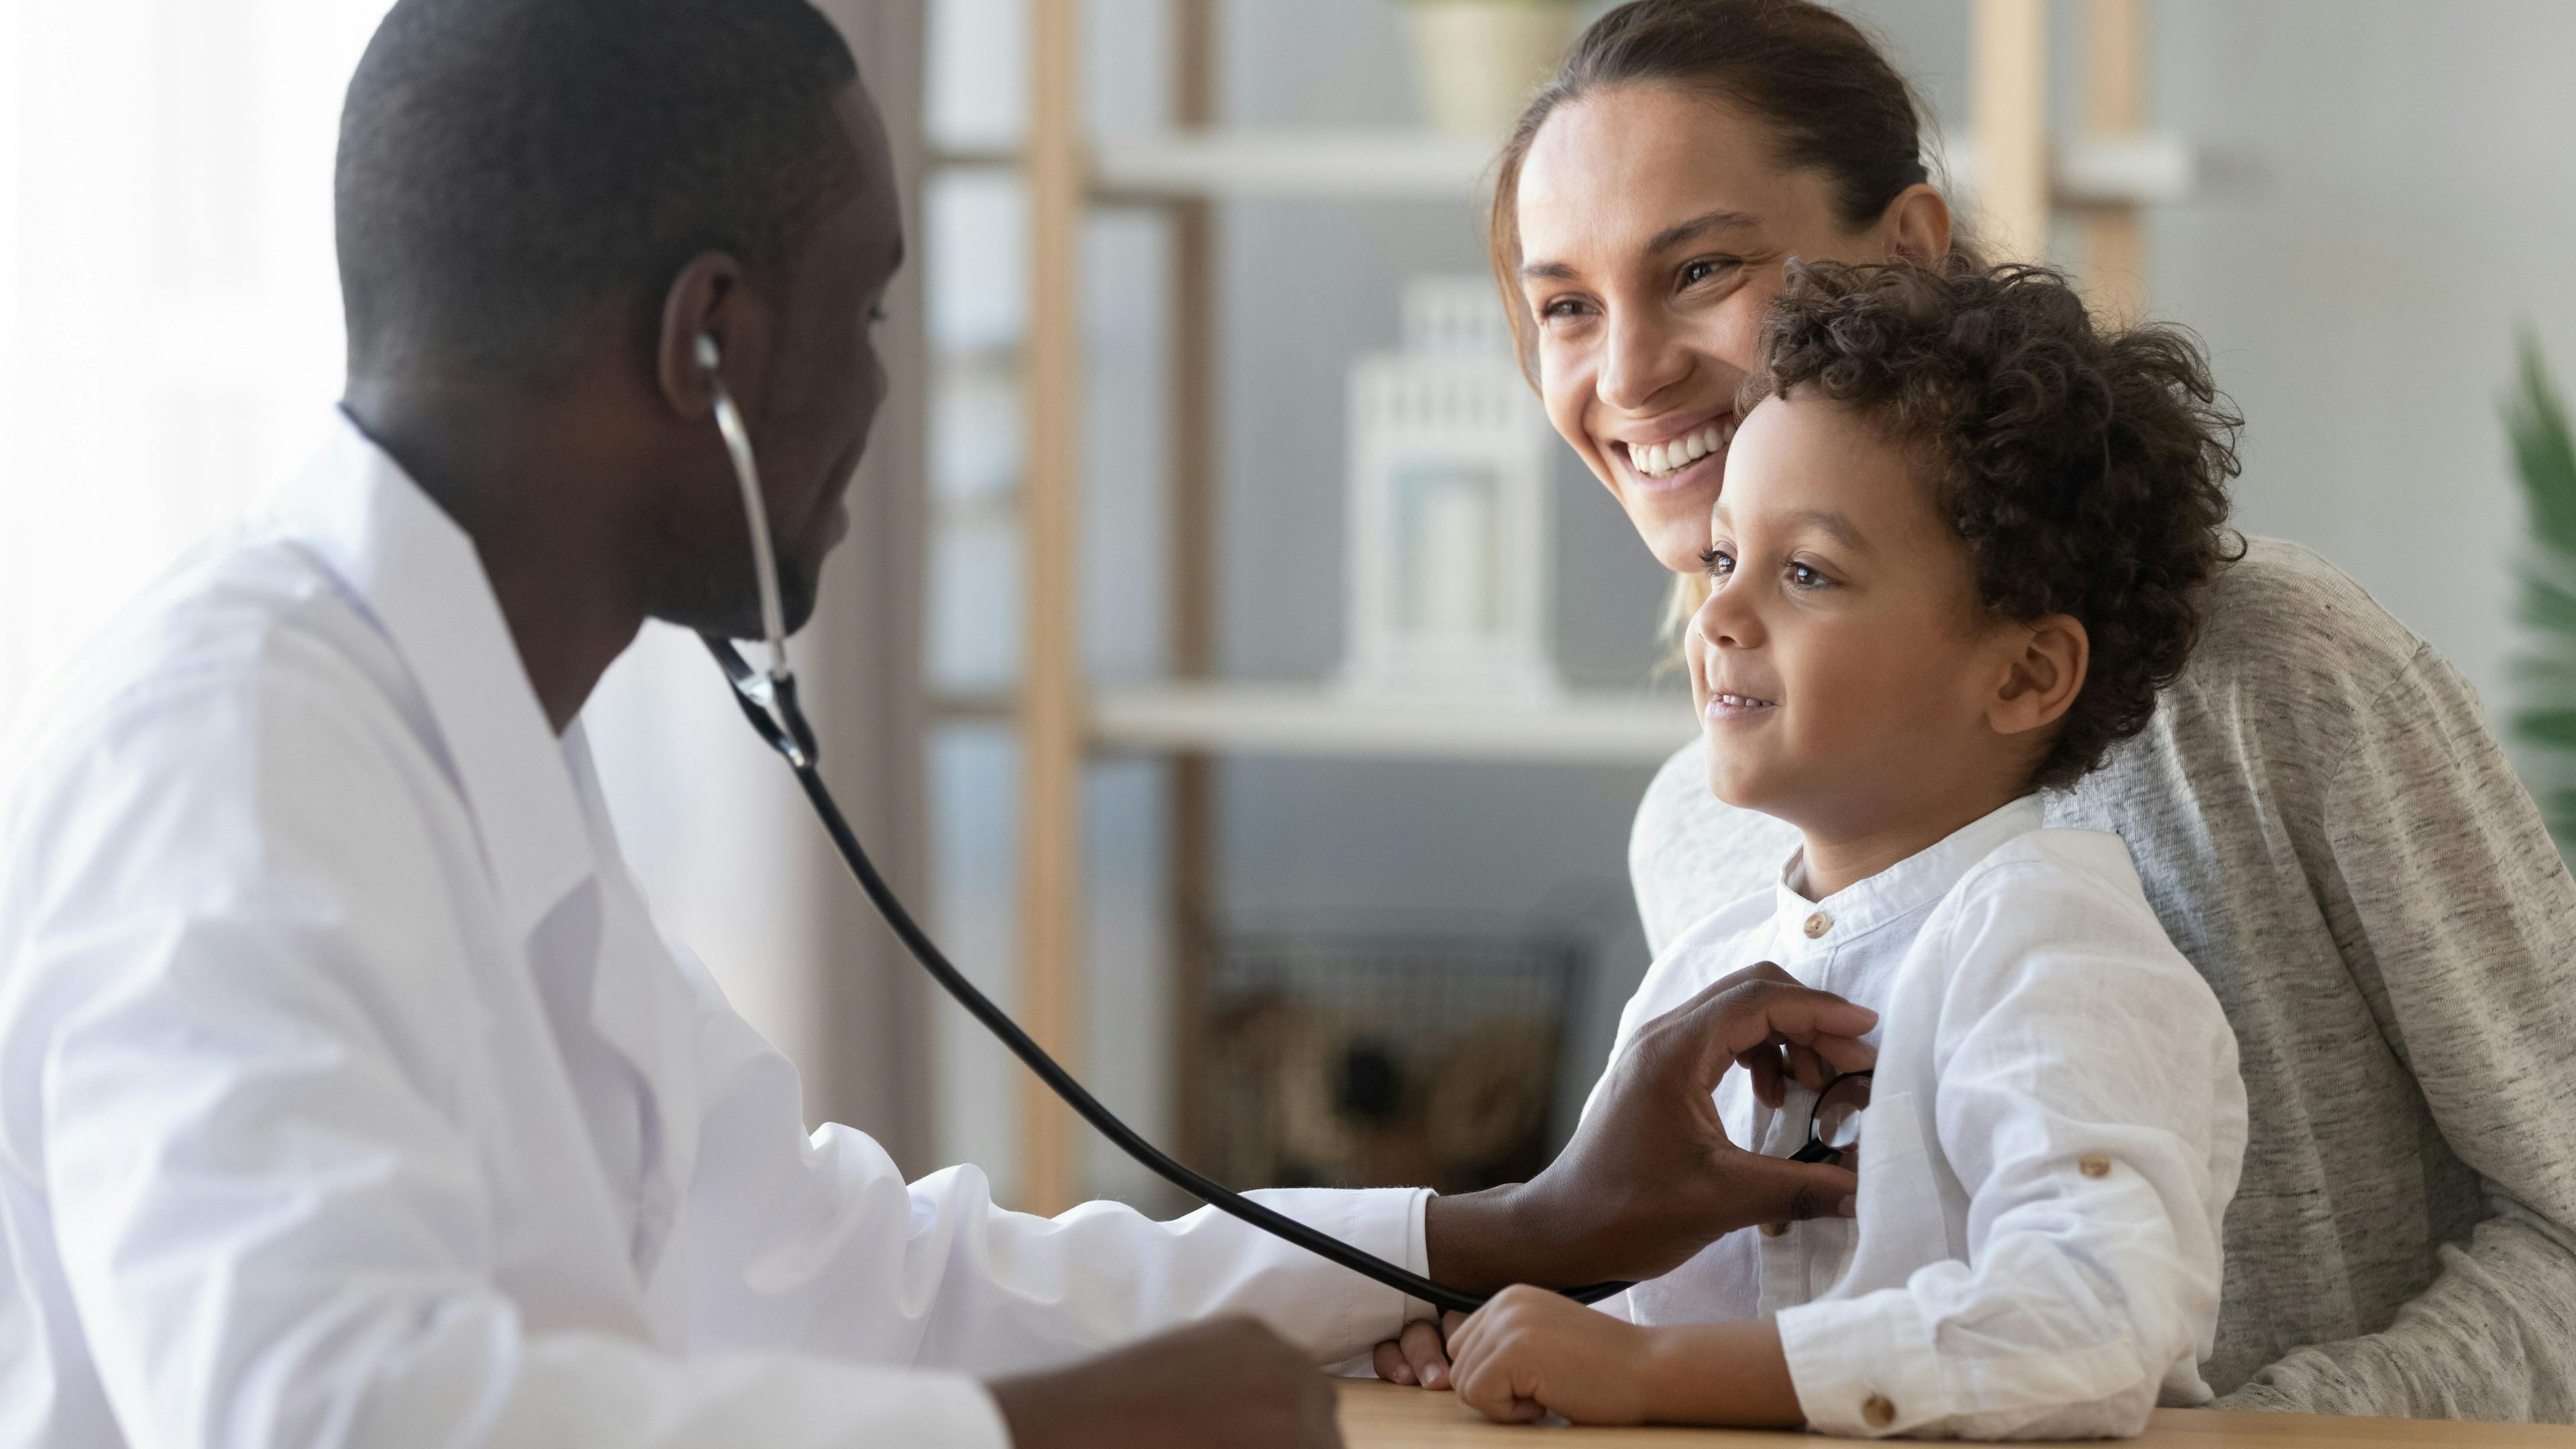 African male pediatrician hold stethoscope exam child boy patient | Image credit: Fizkes - stock.adobe.com